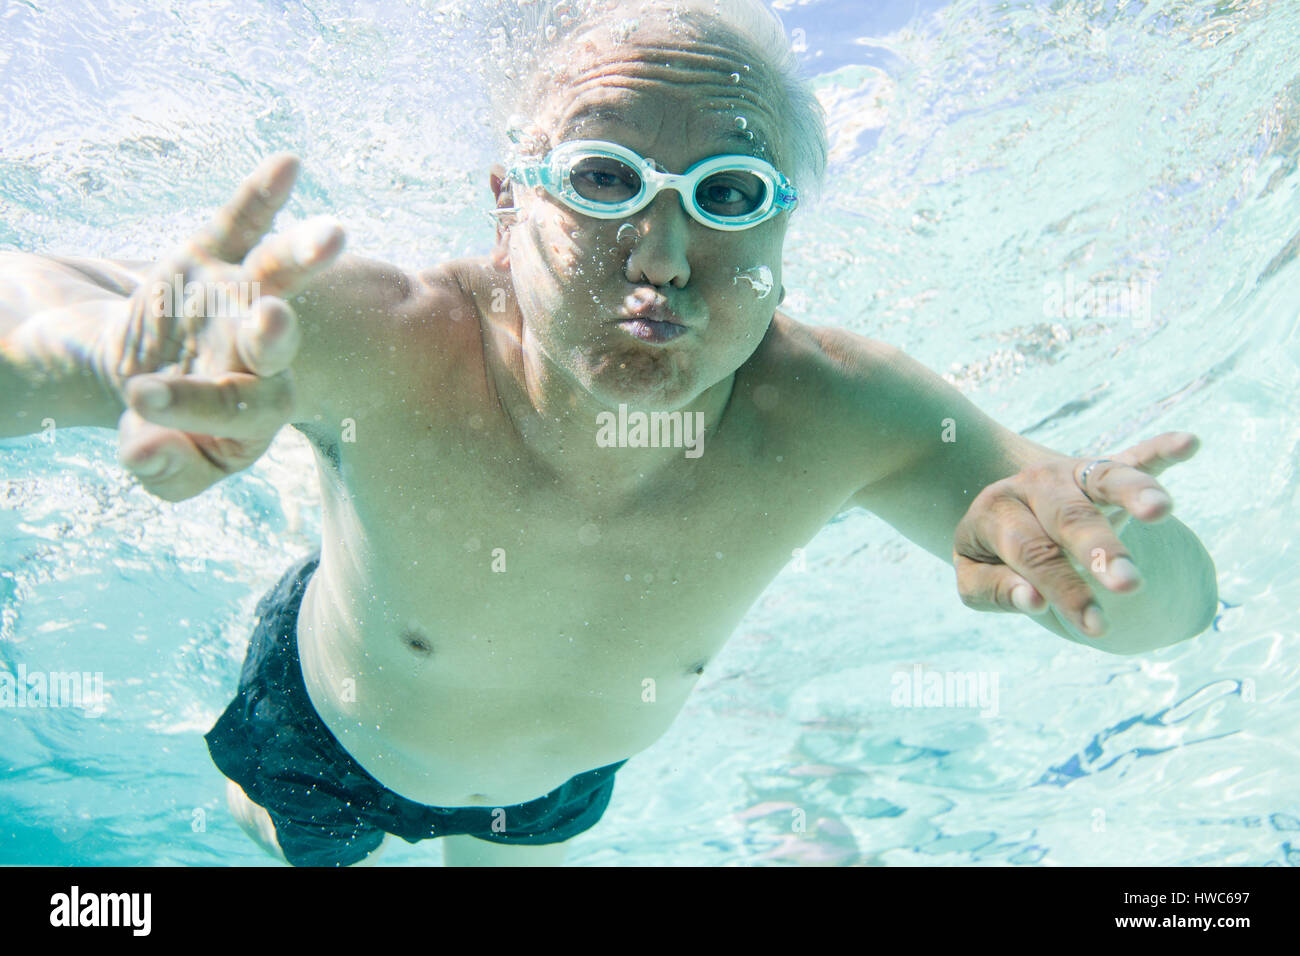 Senior being silly underwater in a swimming pool Stock Photo